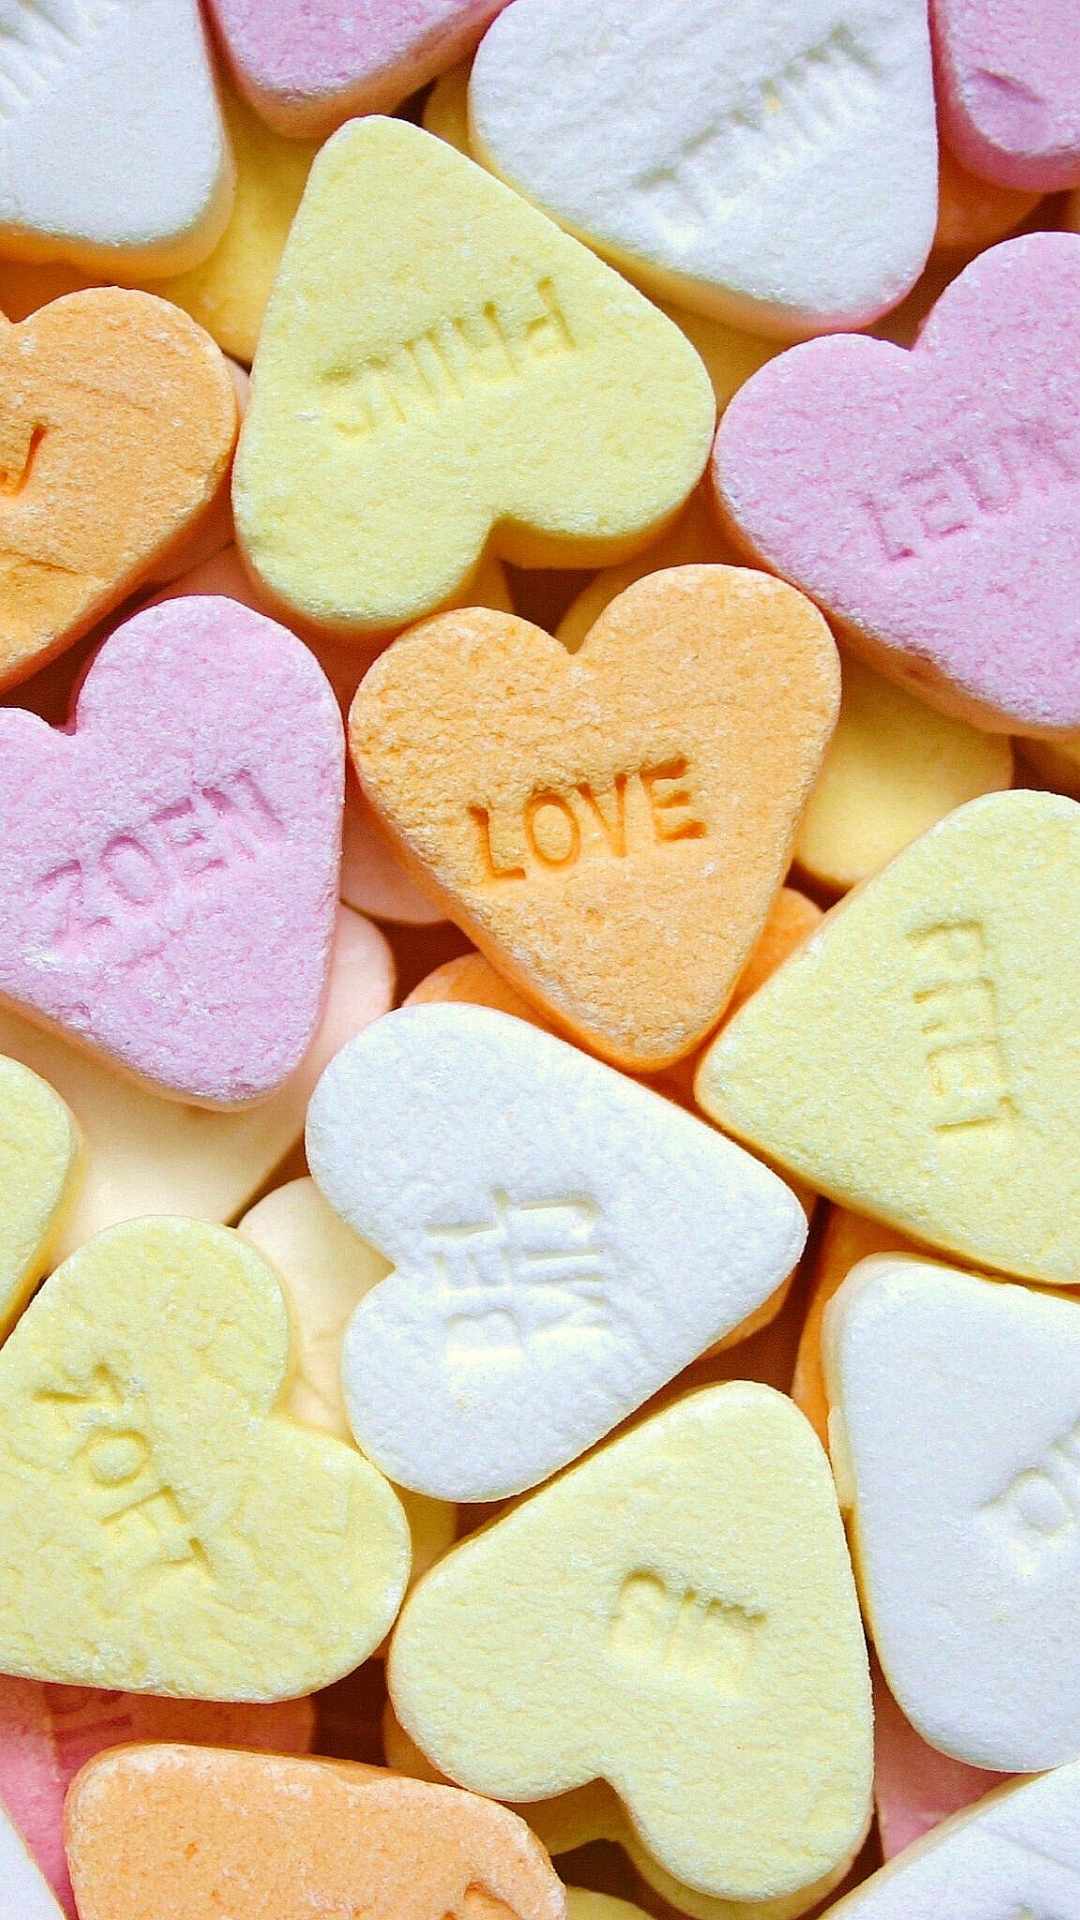 Sweethearts Candy iphone wallpaper for valentines day background in february